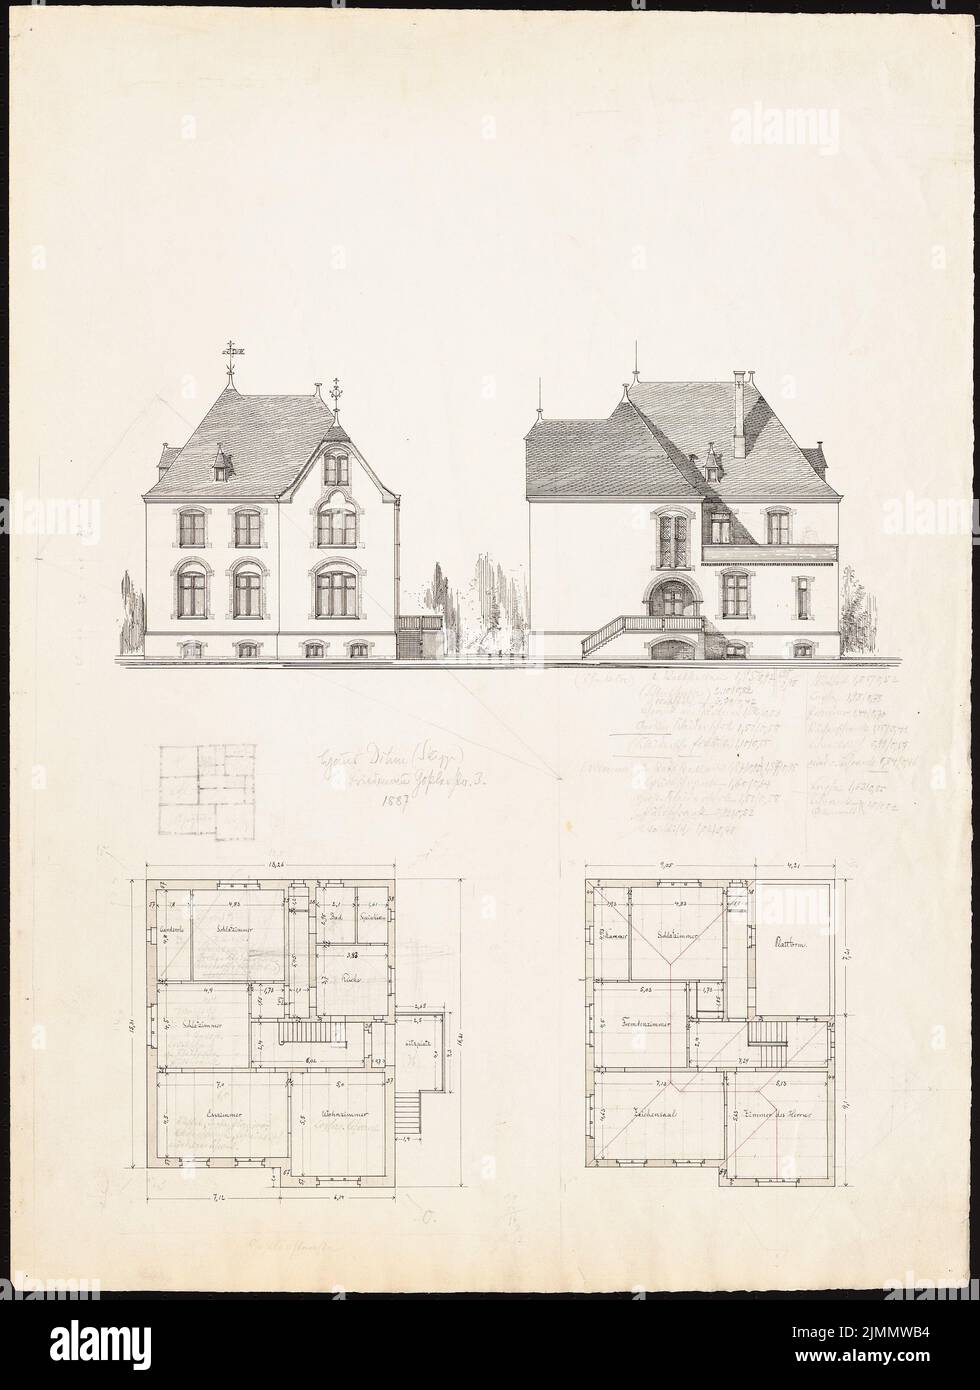 Dihm Ludwig (1849-1928), Haus Dihm, Berlin-Friedenau (1887): 2 views, 2 floor plans (with sketches). Ink, pencil, ink colored on paper, 69.1 x 52.1 cm (including scan edges) Stock Photo